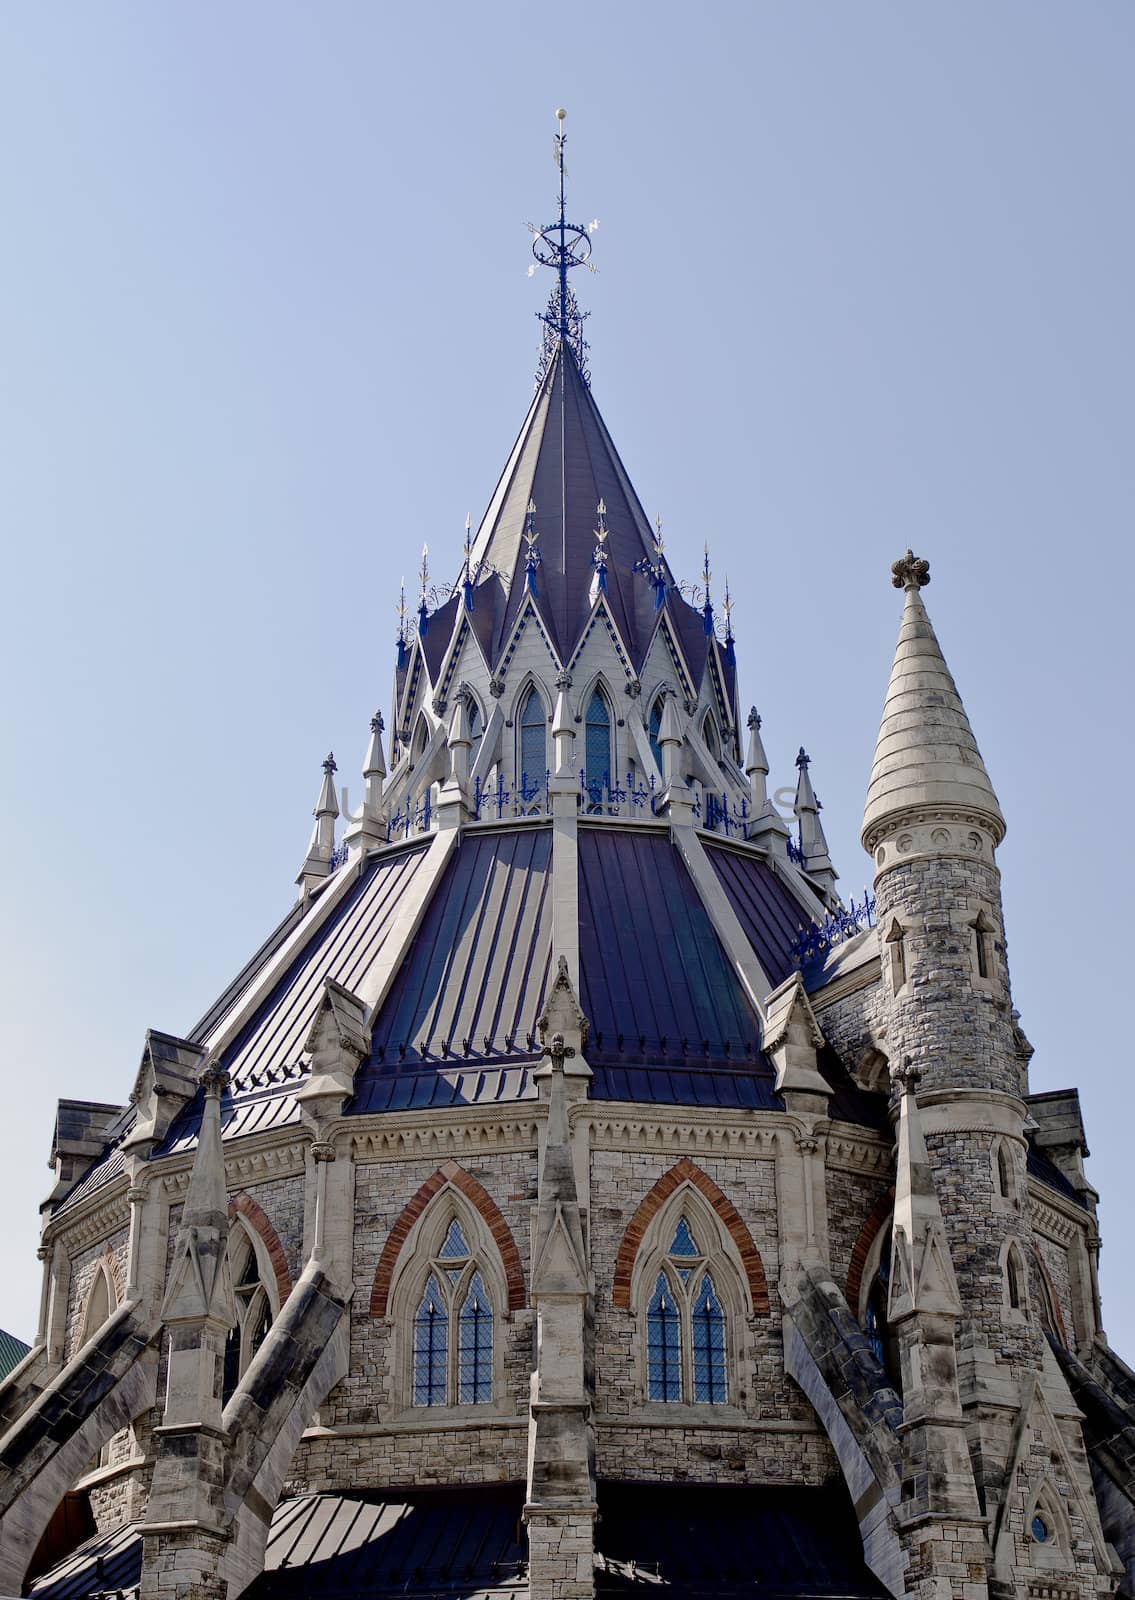 A closeup of the Library of Parliament with small tower on the side in Ottawa, Canada.